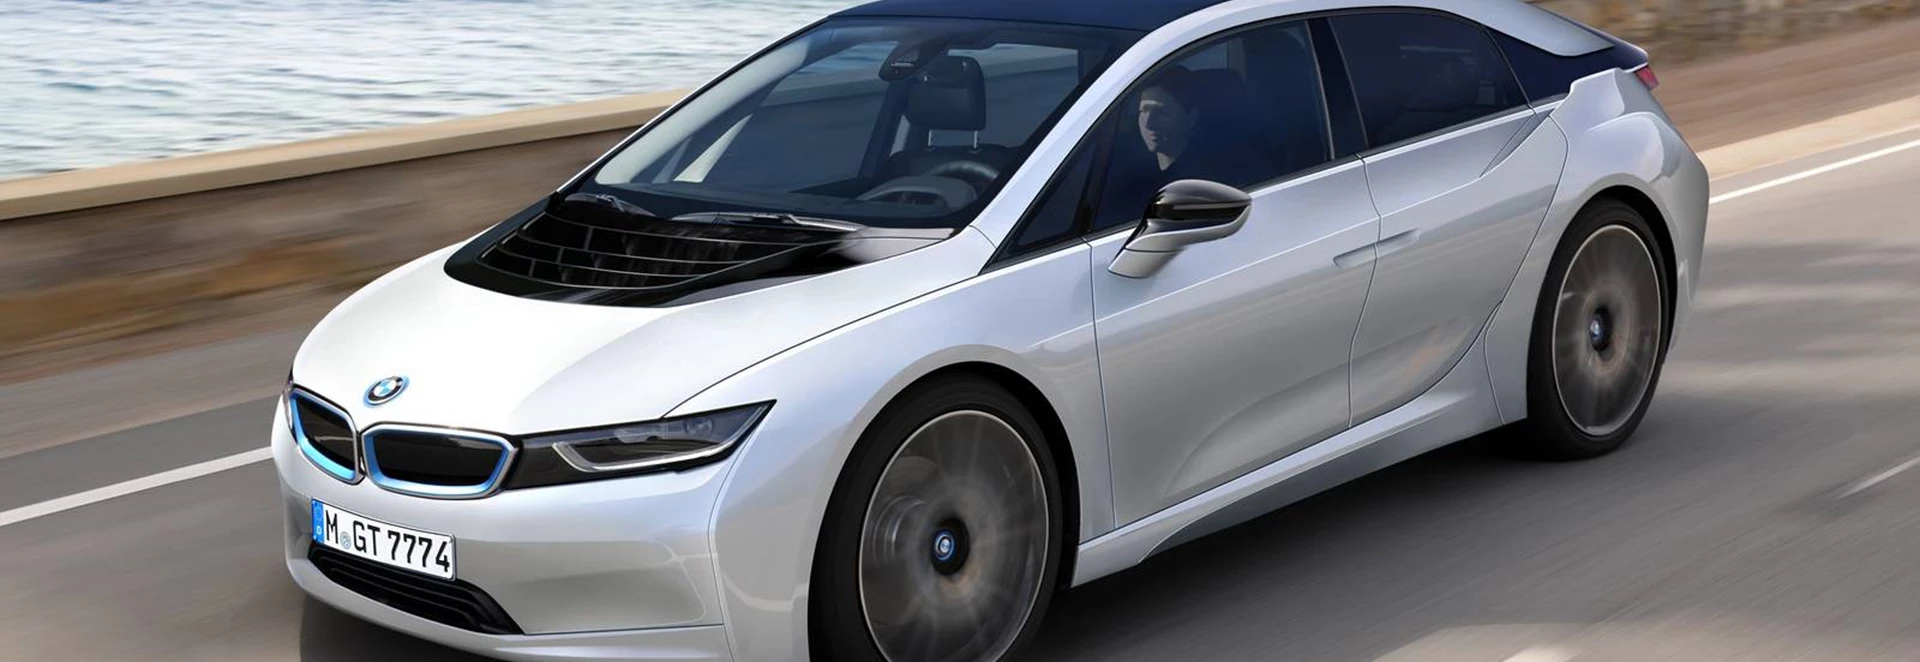 BMW i5 rumours: new electric model on the way?